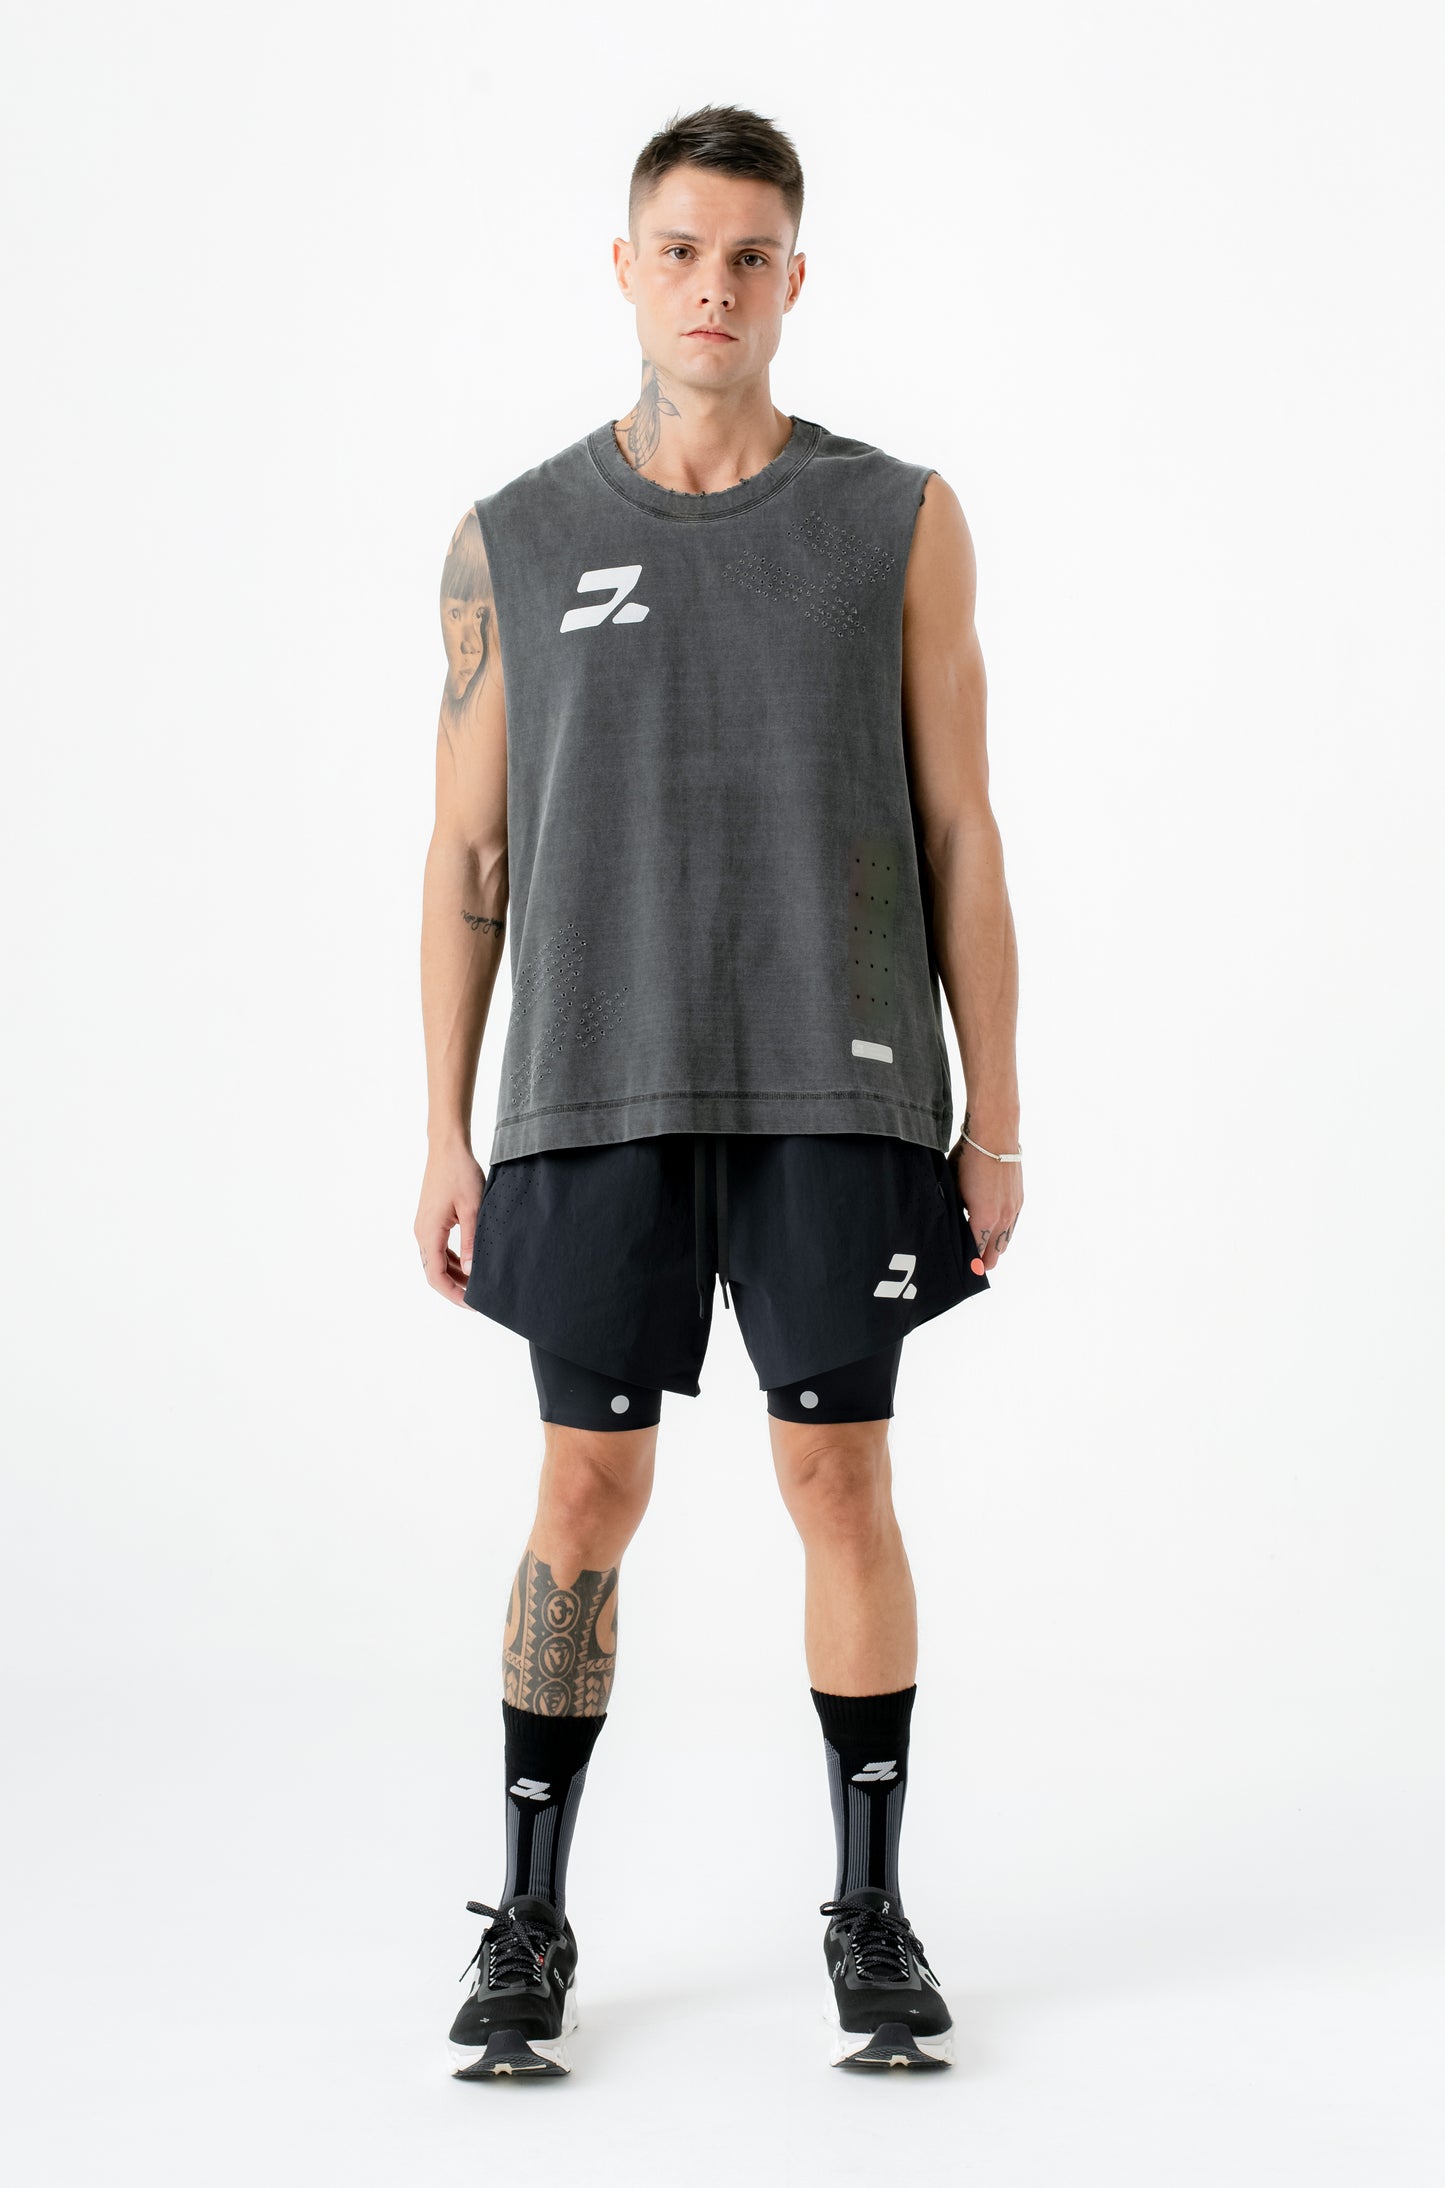 PACE - DT2 Double Layers Spots Shorts "Black" - THE GAME